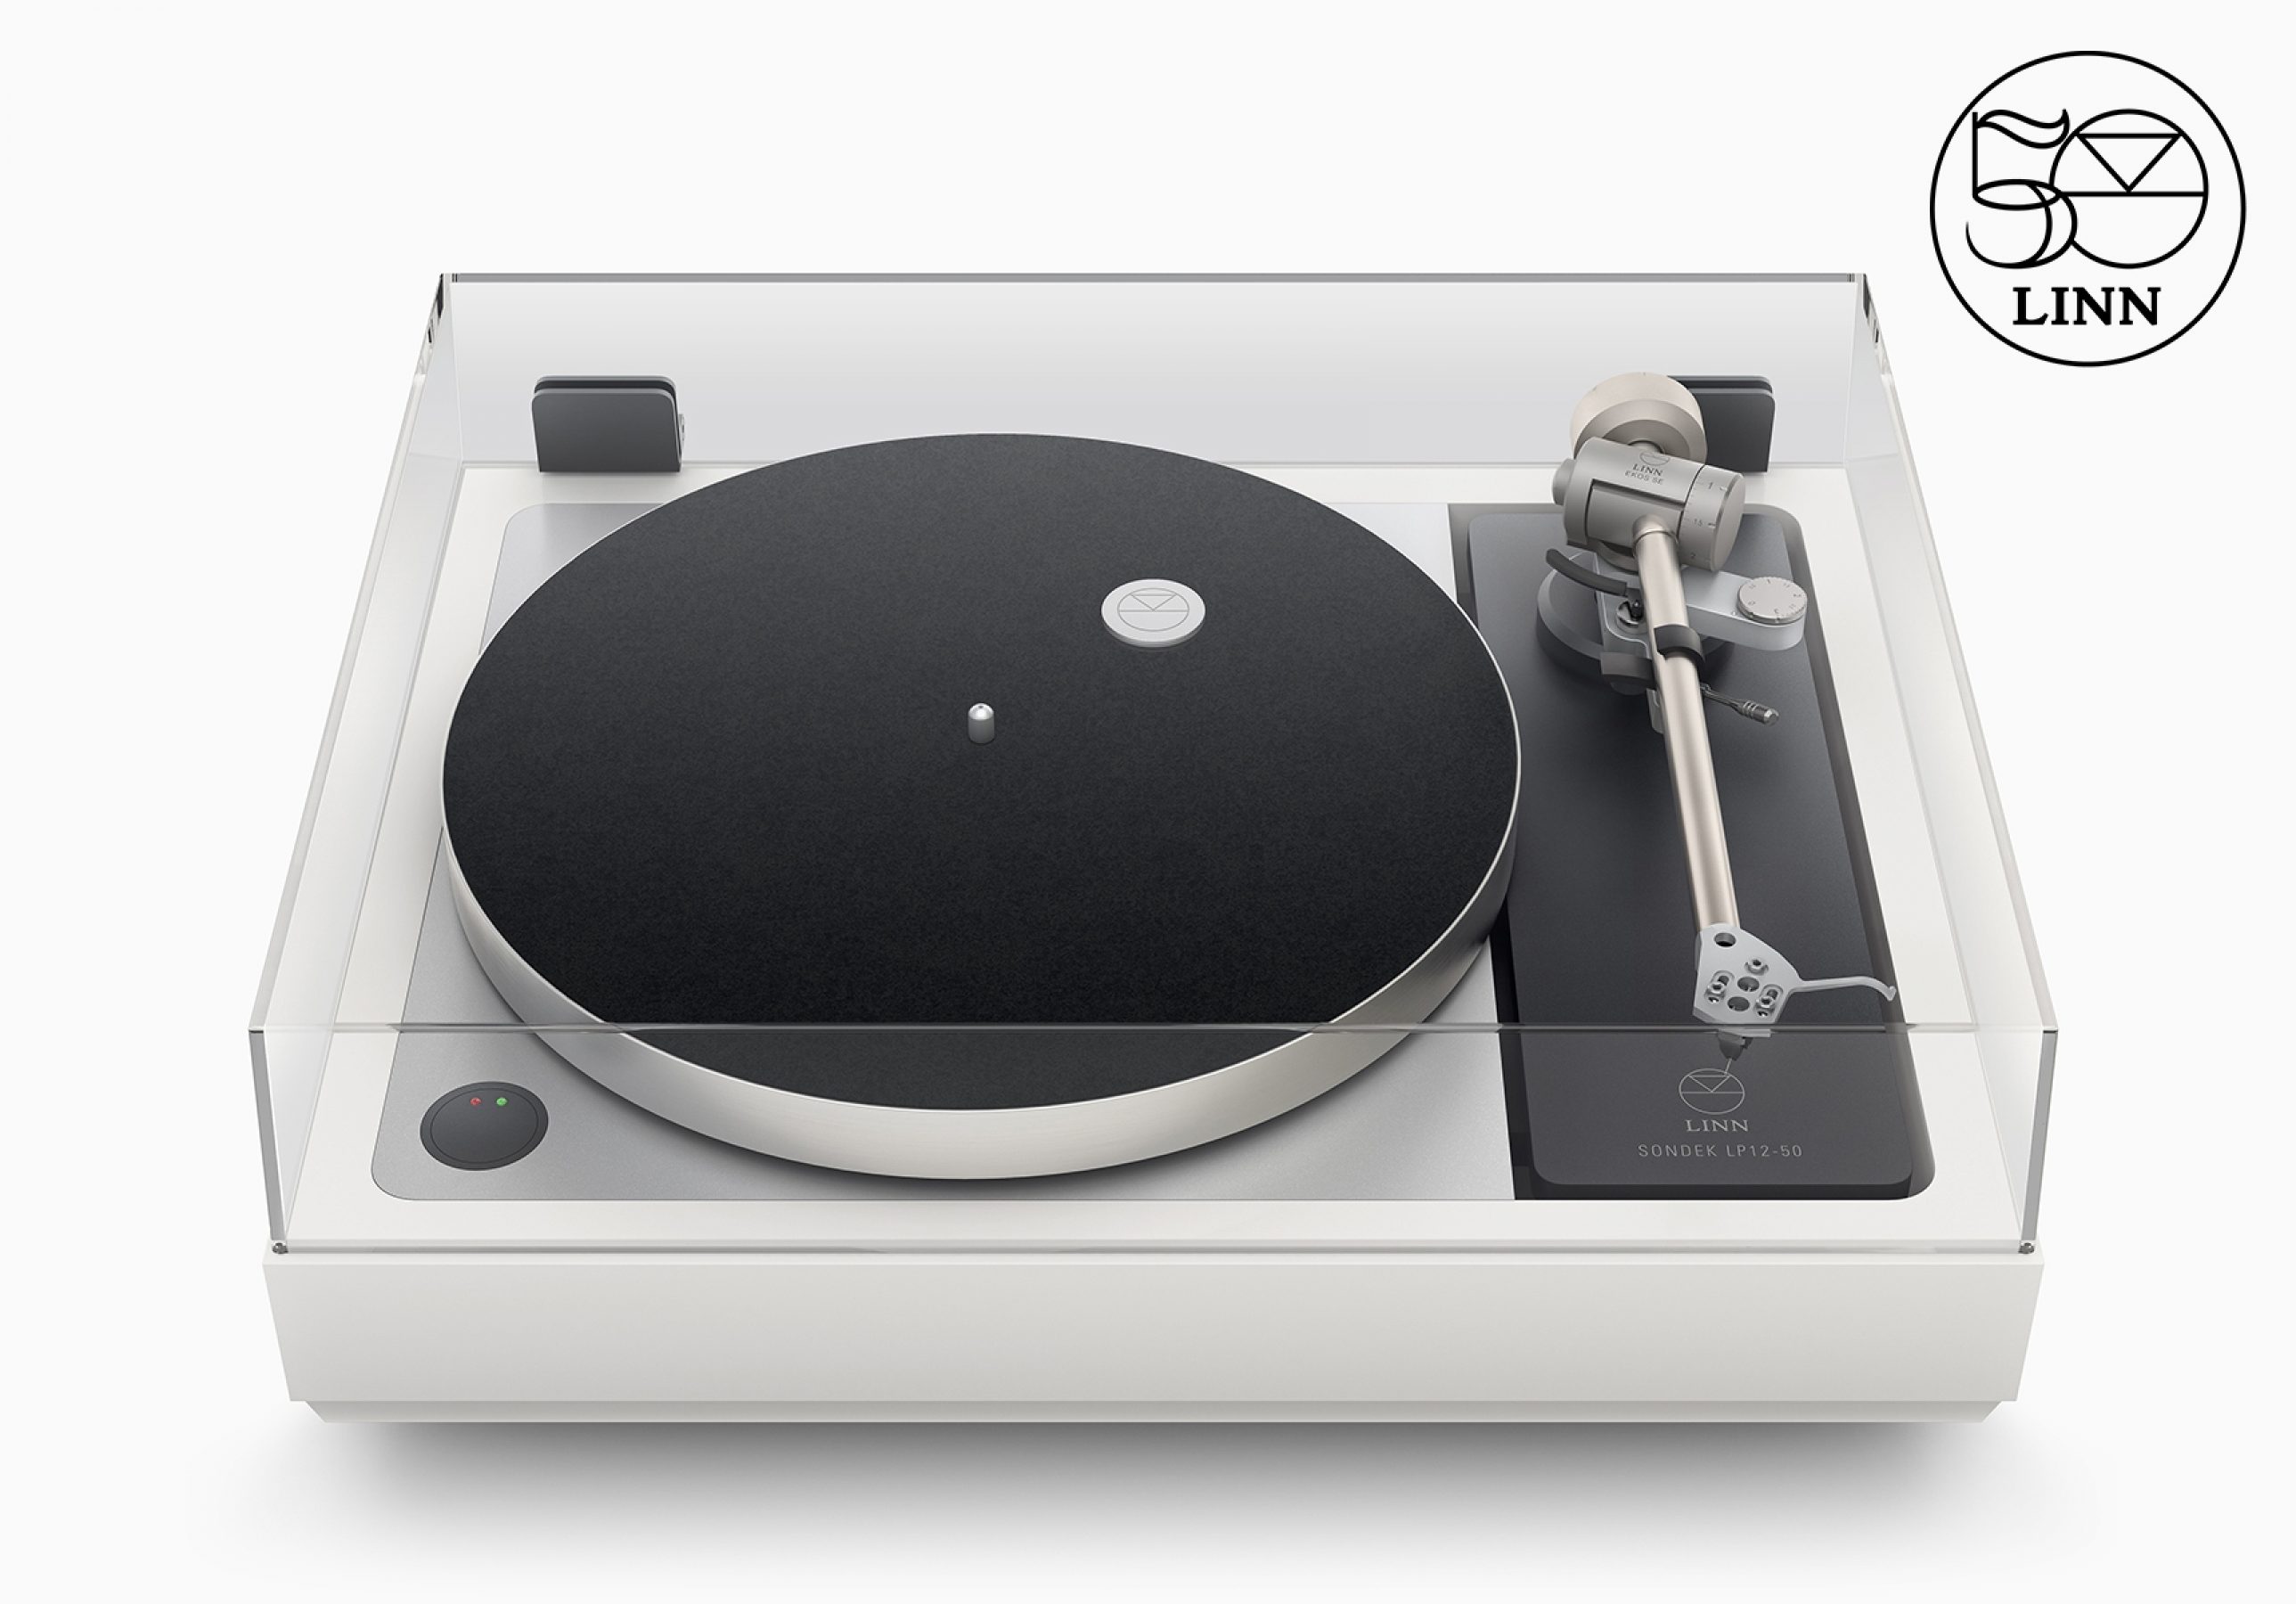 If Apple Designed a Turntable, This Is Probably What It Would Look Like